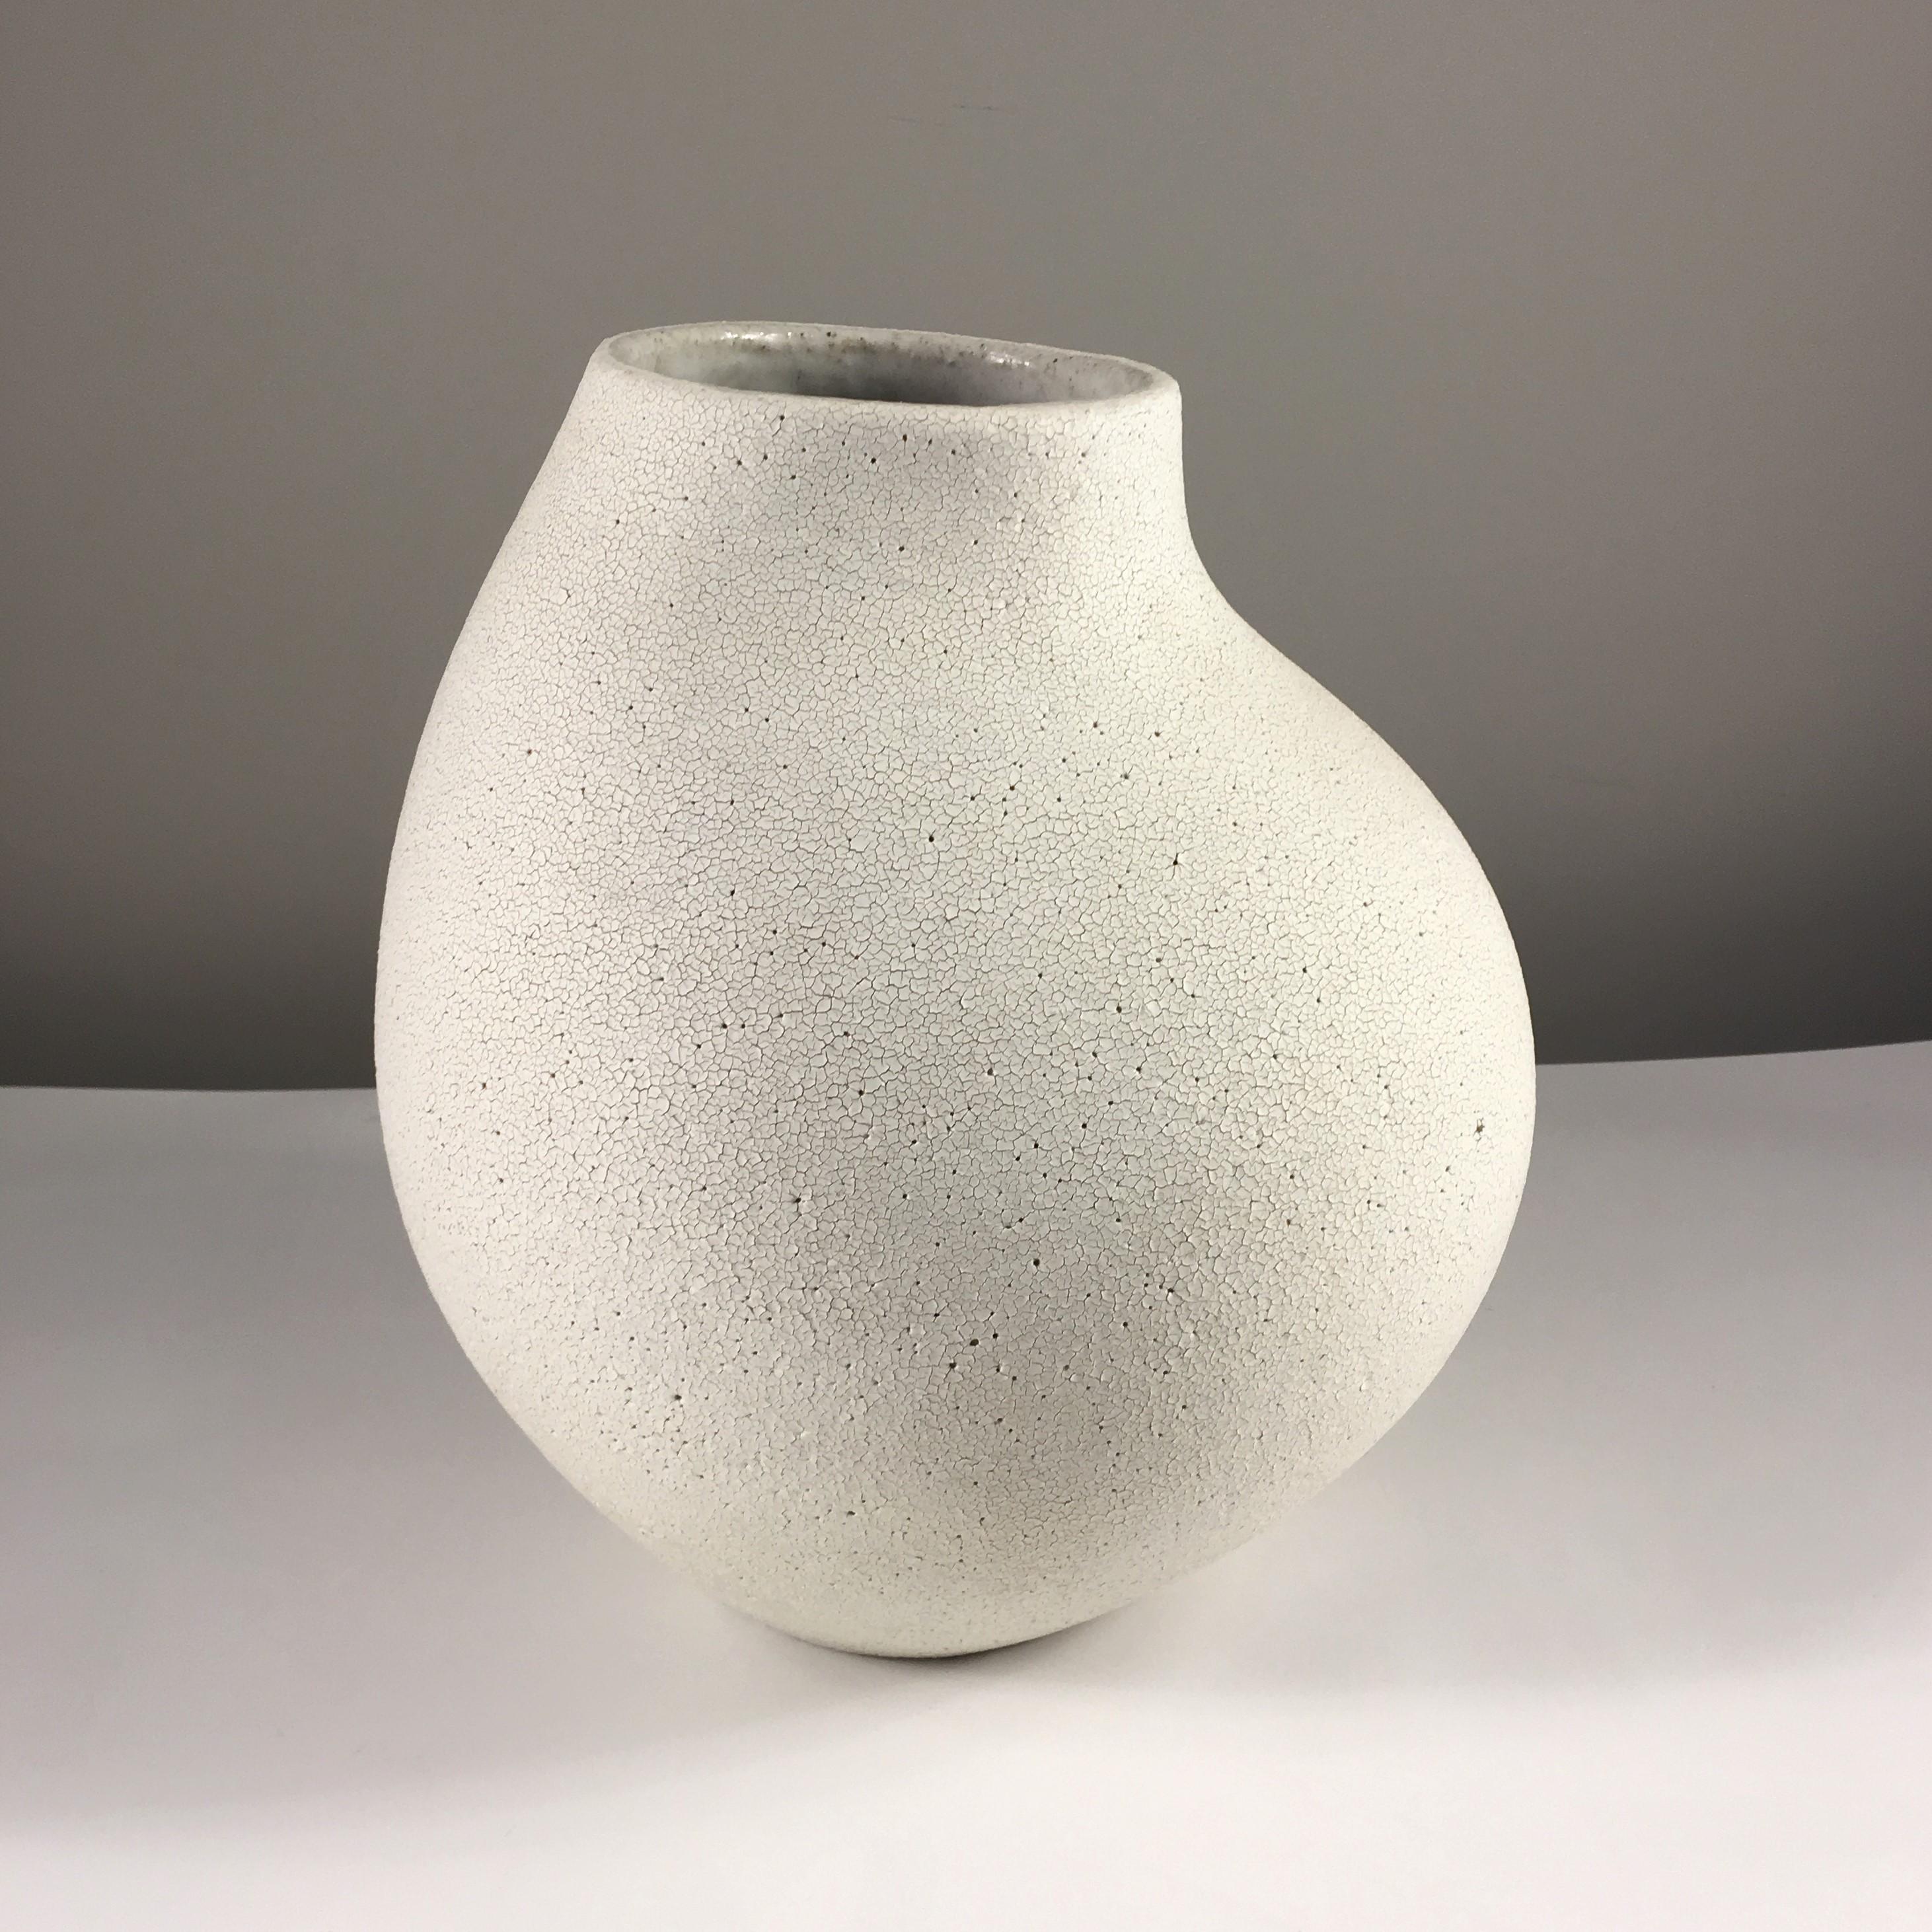 Wide Curved Neck Vase by Yumiko Kuga. Measures: Height 10